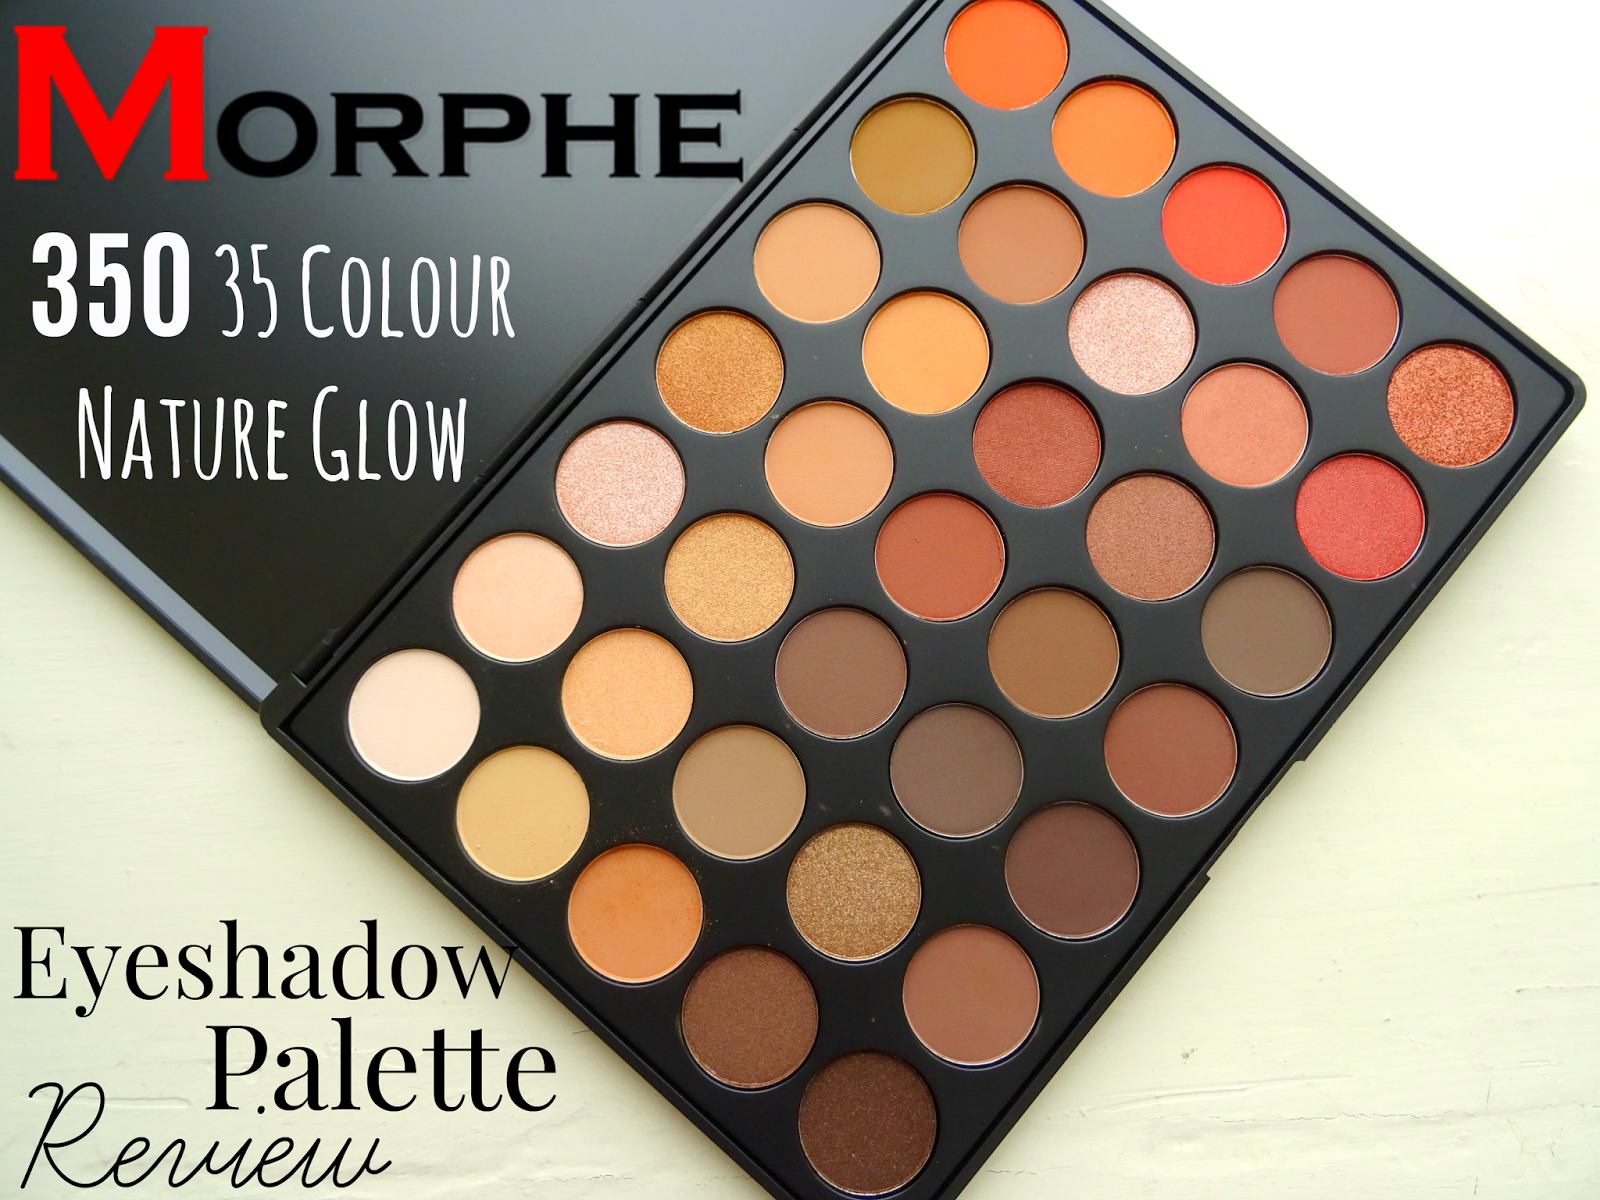 Morphe 35O 35 Colour Nature Glow Eyeshadow Palette Review